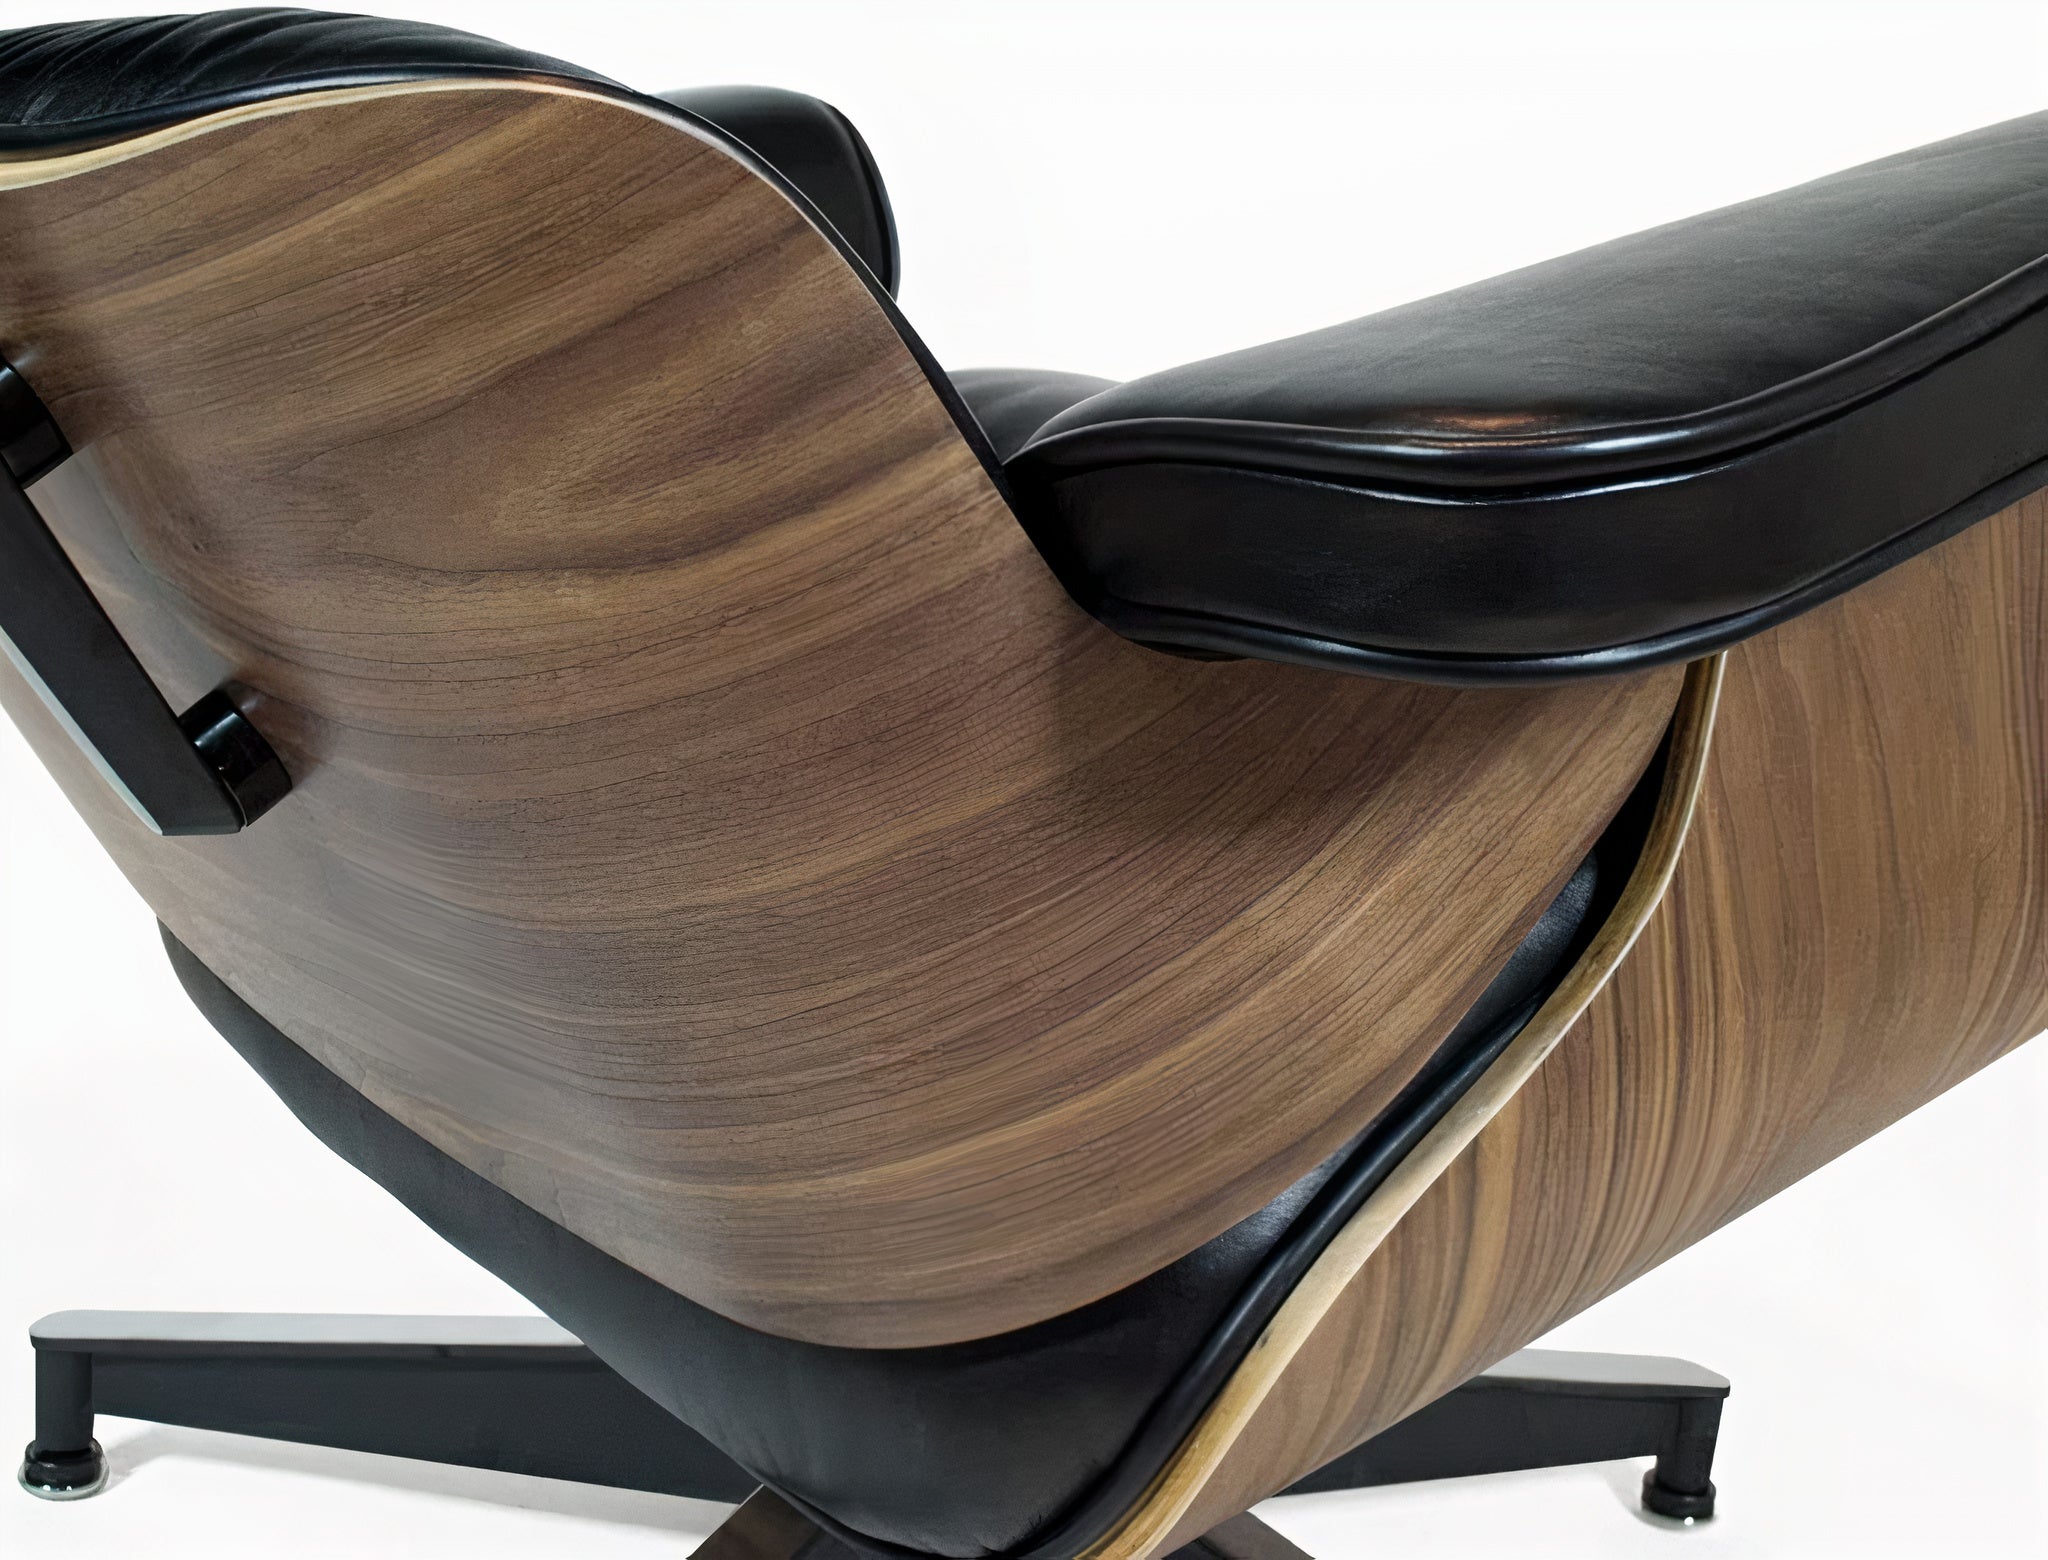 Eames lounge chair and ottoman